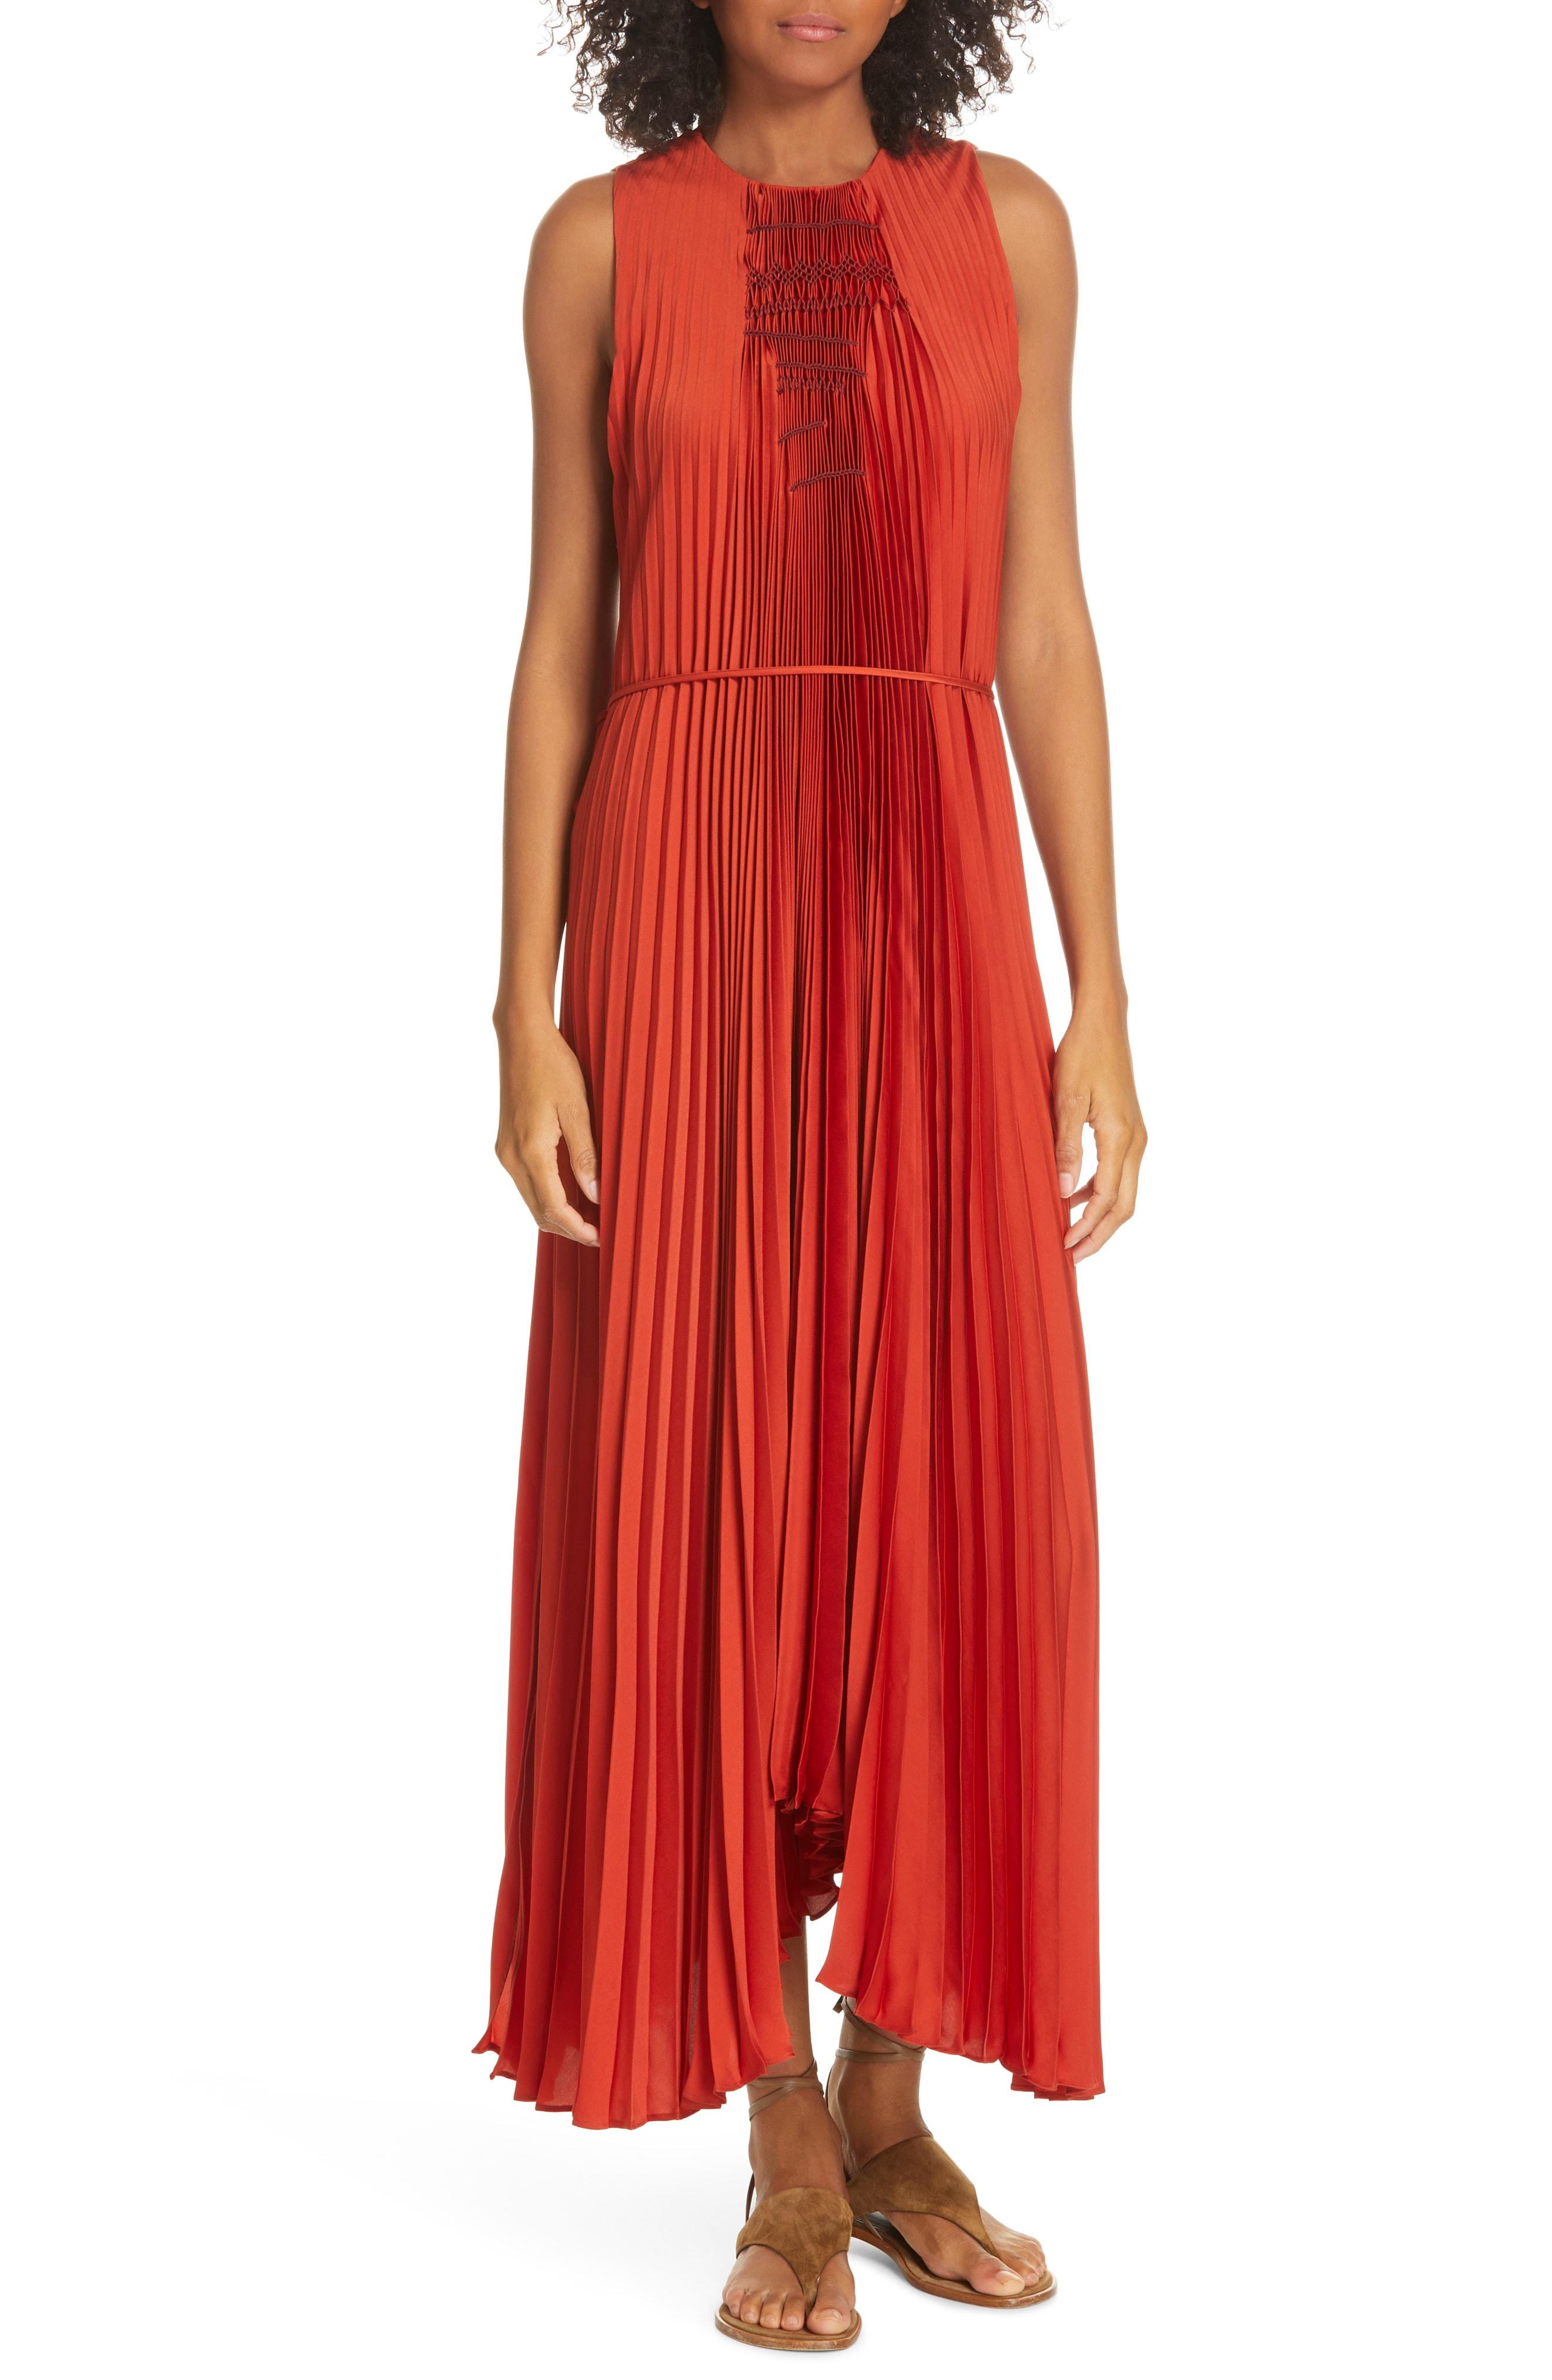 Lyst - Vince Smocked Maxi Dress in Red